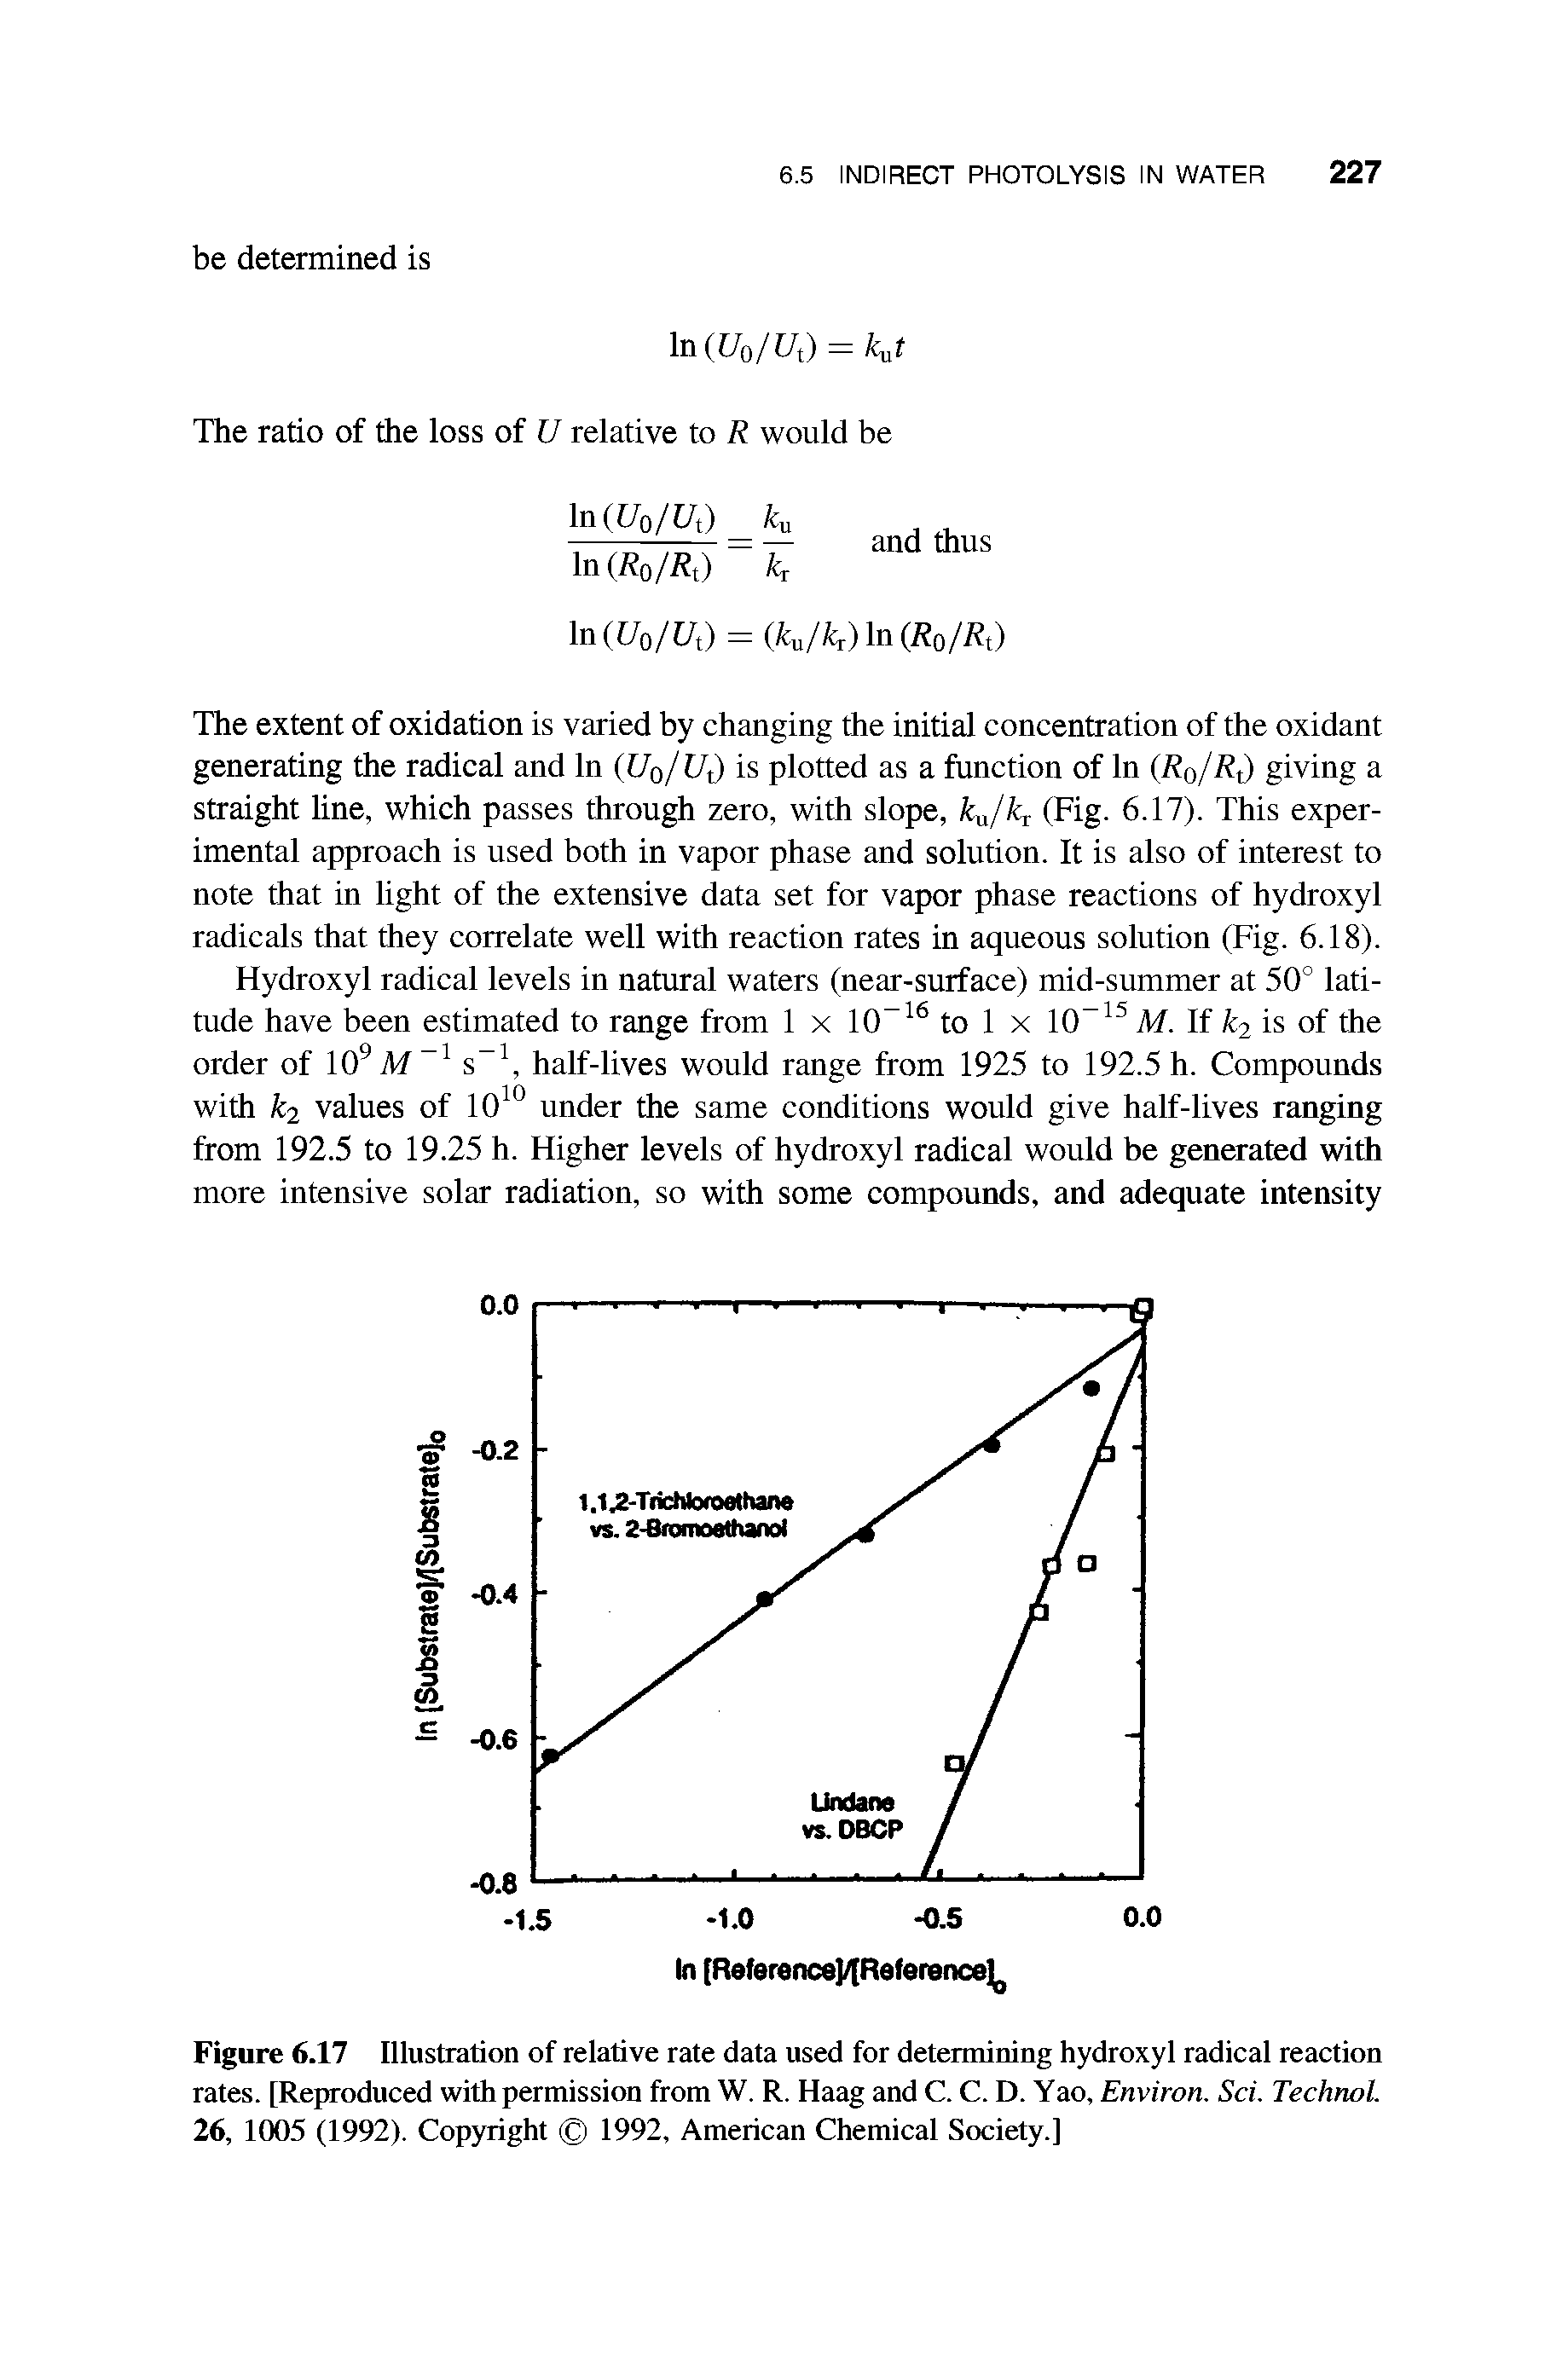 Figure 6.17 Illustration of relative rate data used for determining hydroxyl radical reaction rates. [Reproduced with permission from W. R. Haag and C. C. D. Yao, Environ. Sci. Technol. 26, 1005 (1992). Copyright 1992, American Chemical Society.]...